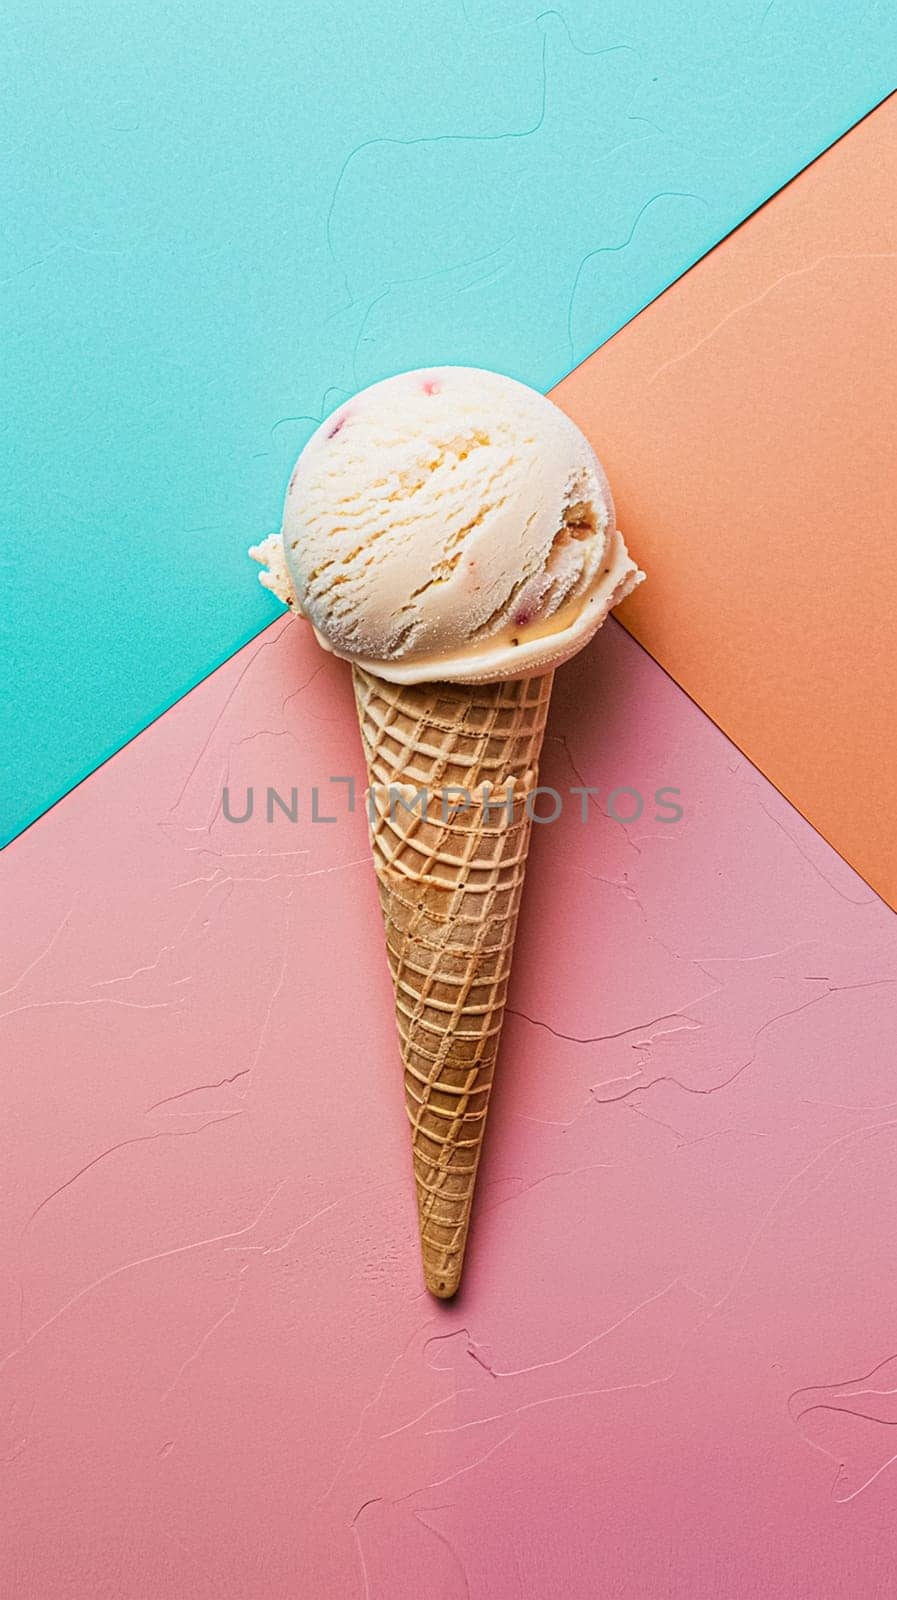 Scoops of ice cream in a waffle cone on a colorful background